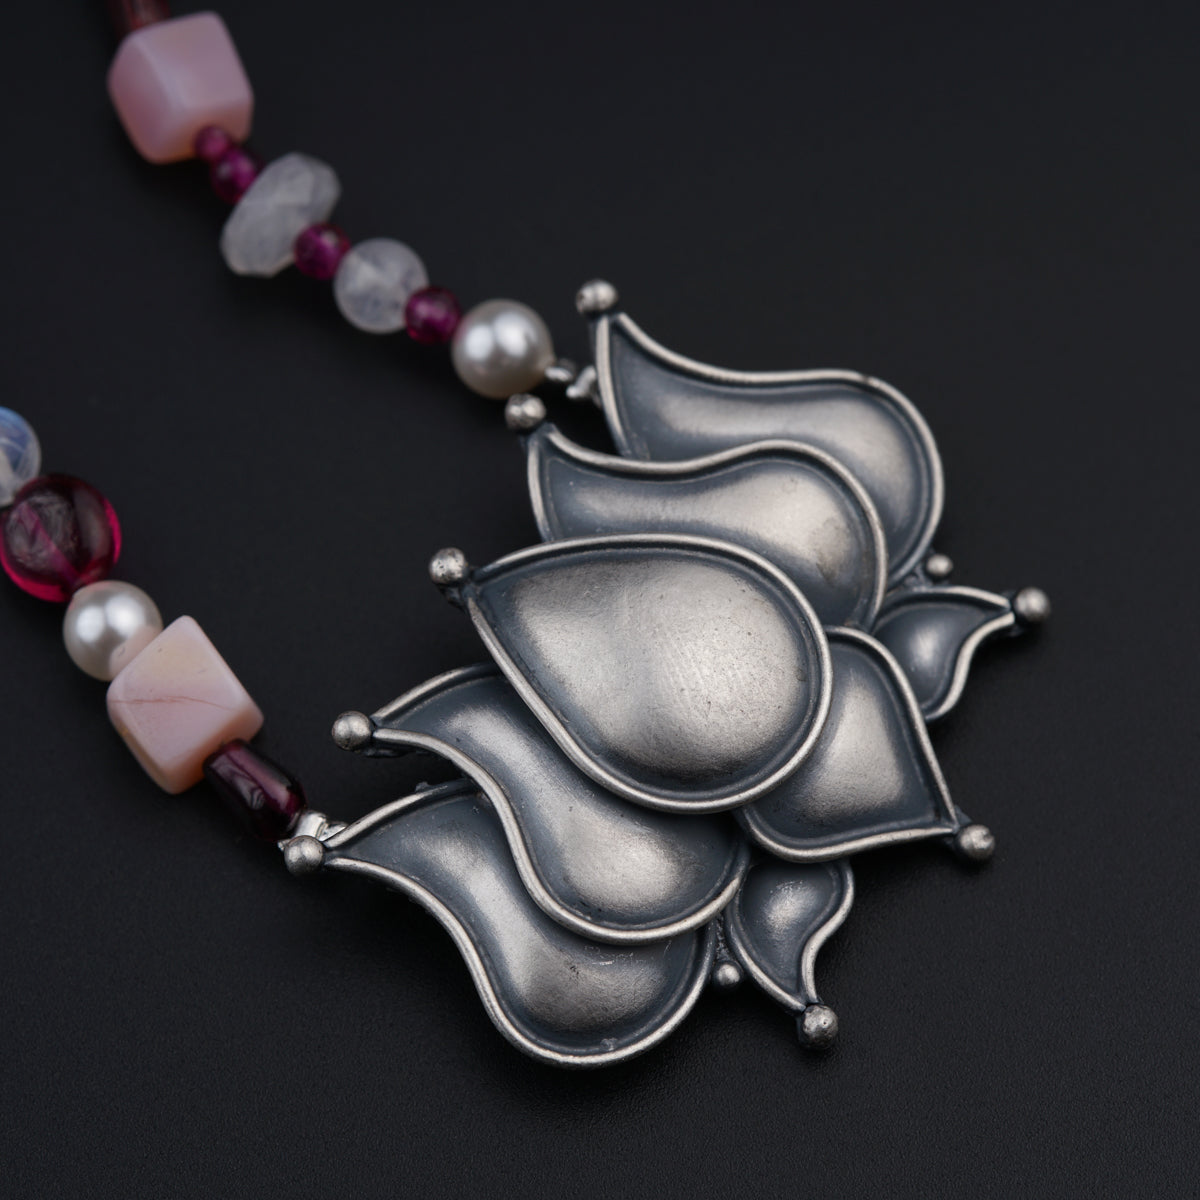 a necklace with beads and a flower design